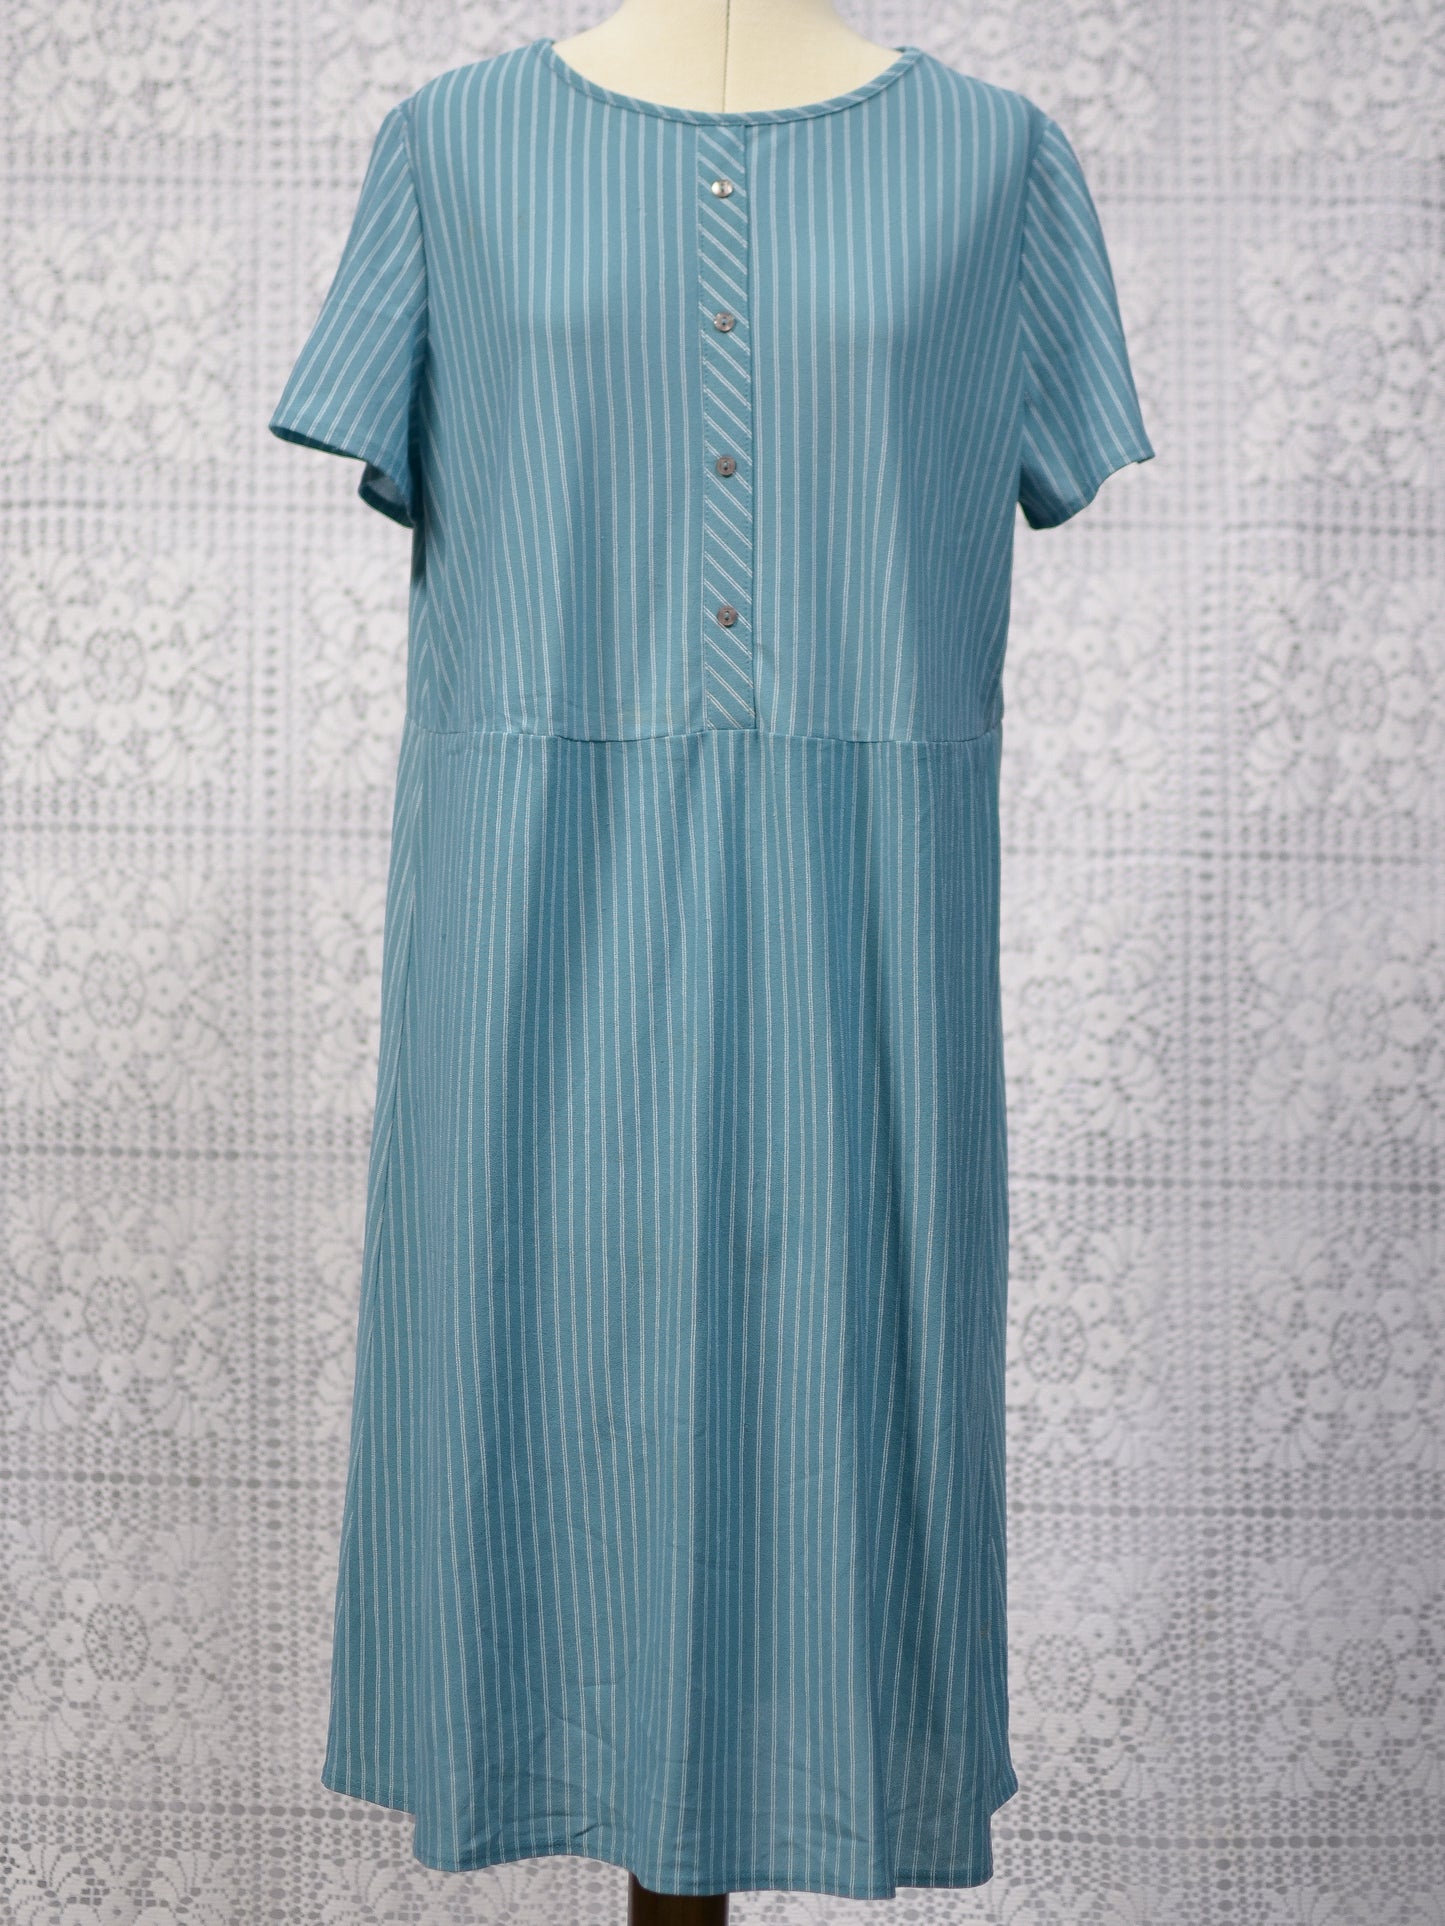 1980s St Michael light turquoise and white pinstripe t-shirt dress